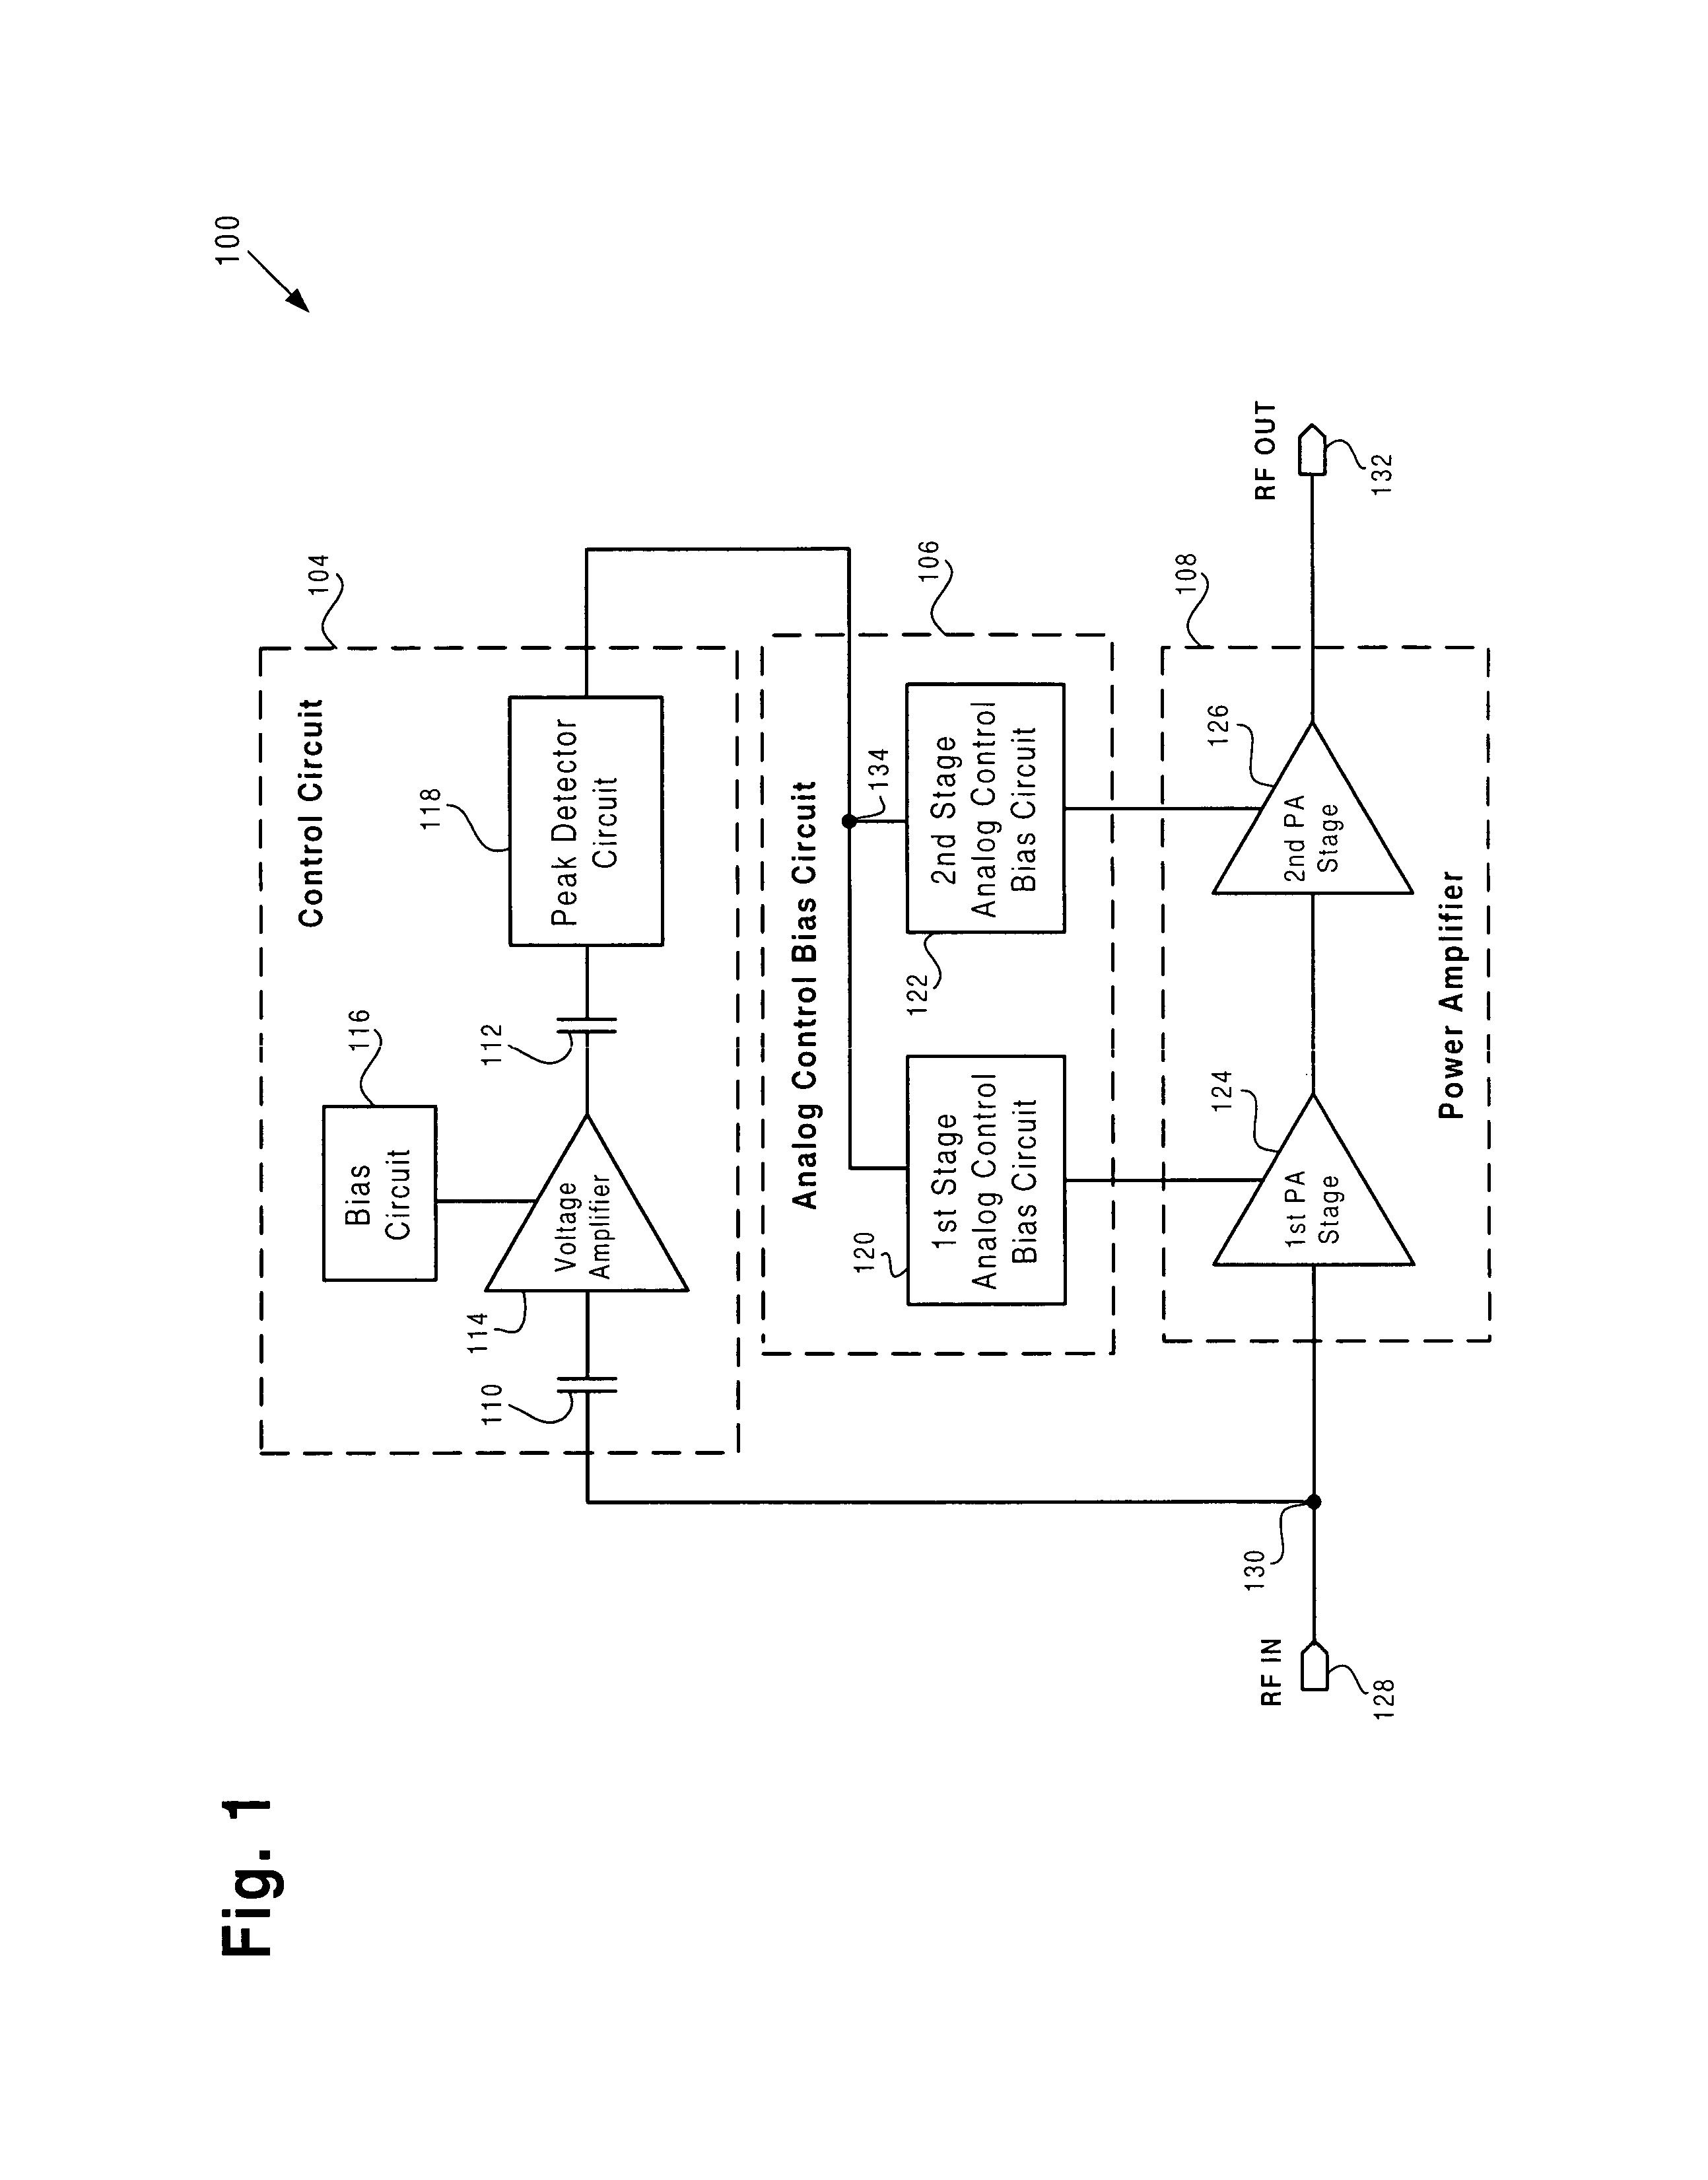 Quiescent current control circuit for power amplifiers